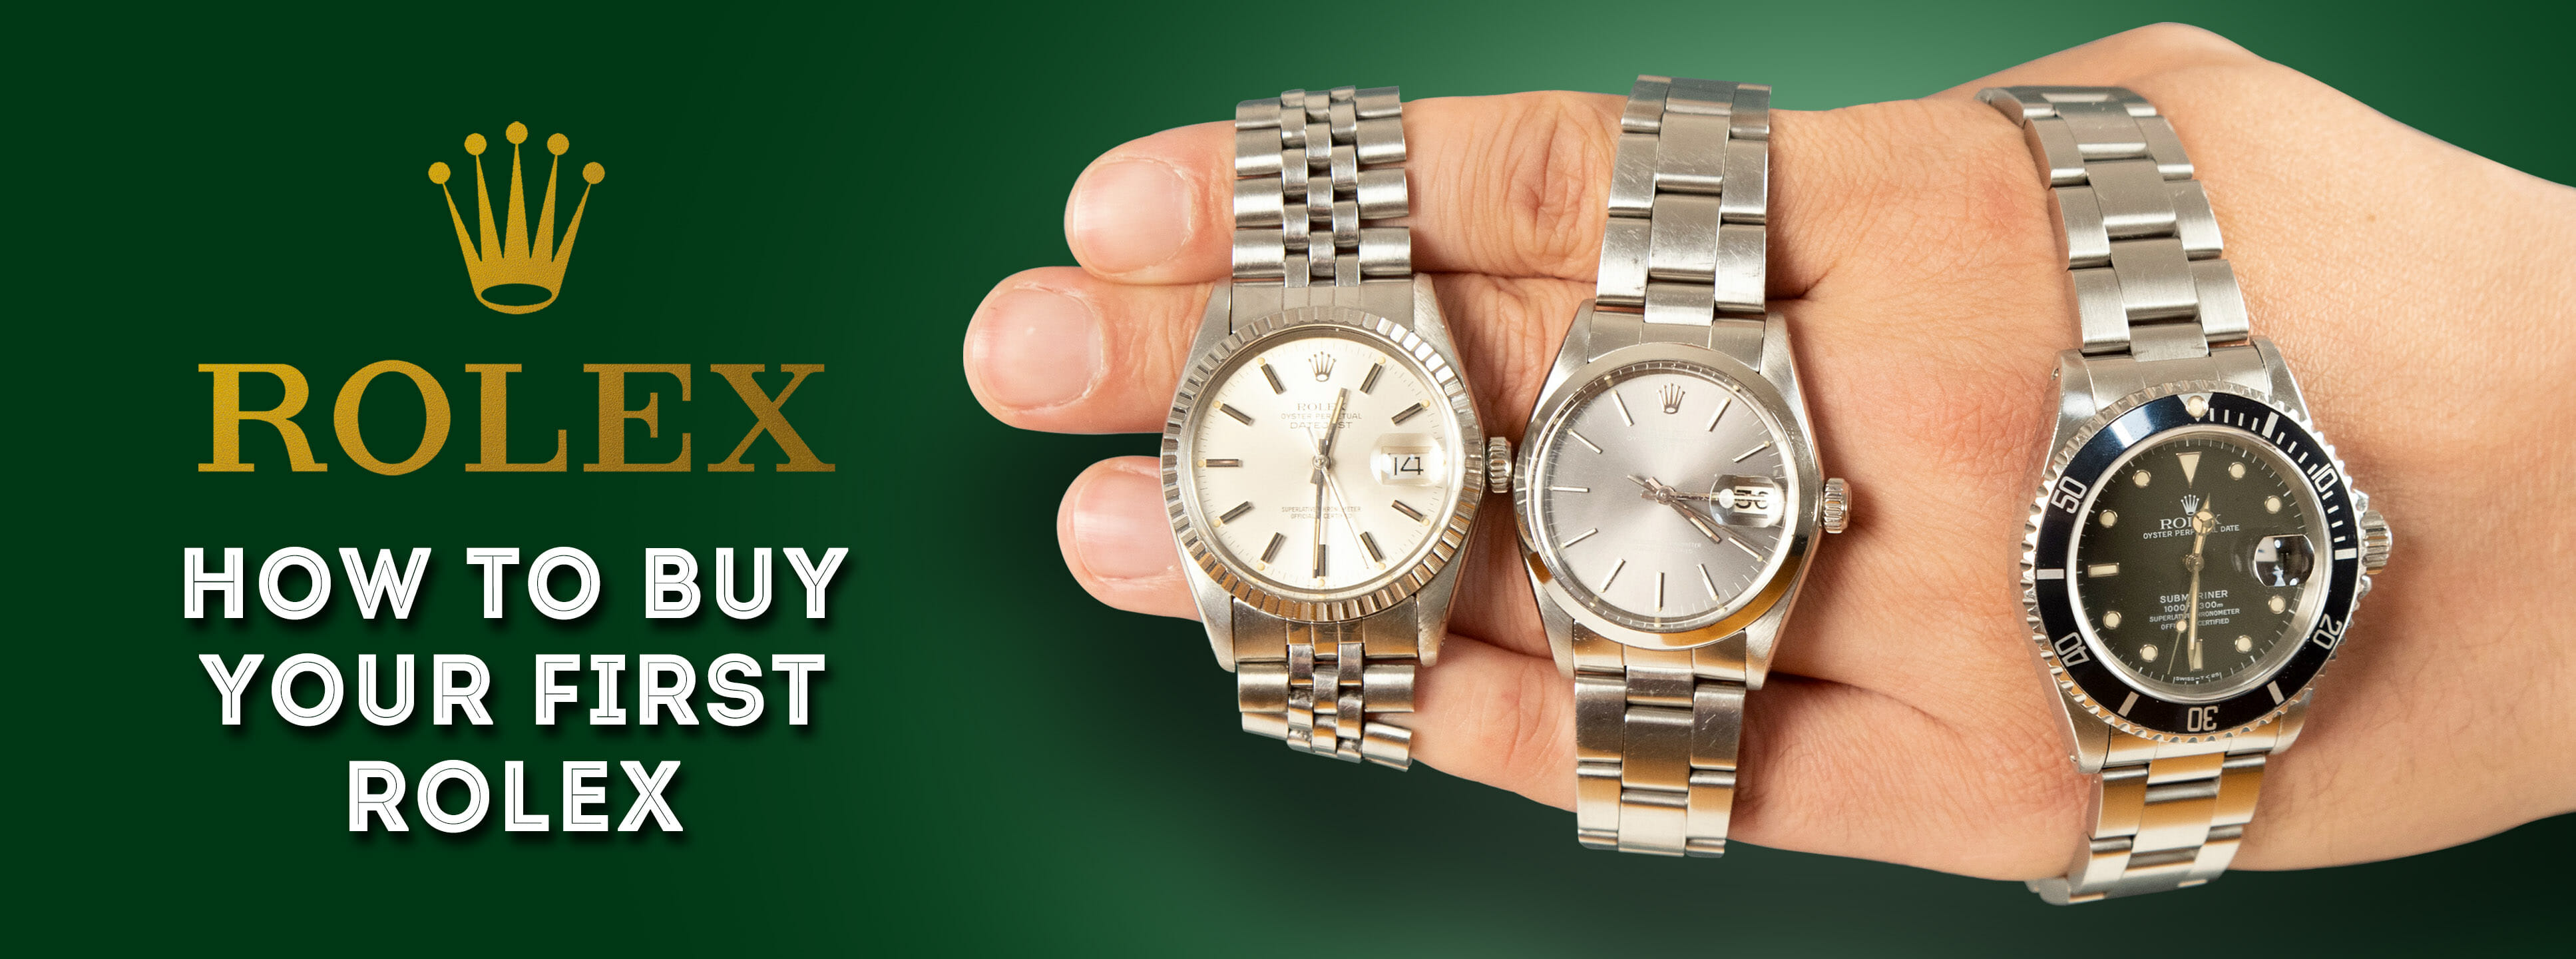 second hand rolexes for sale